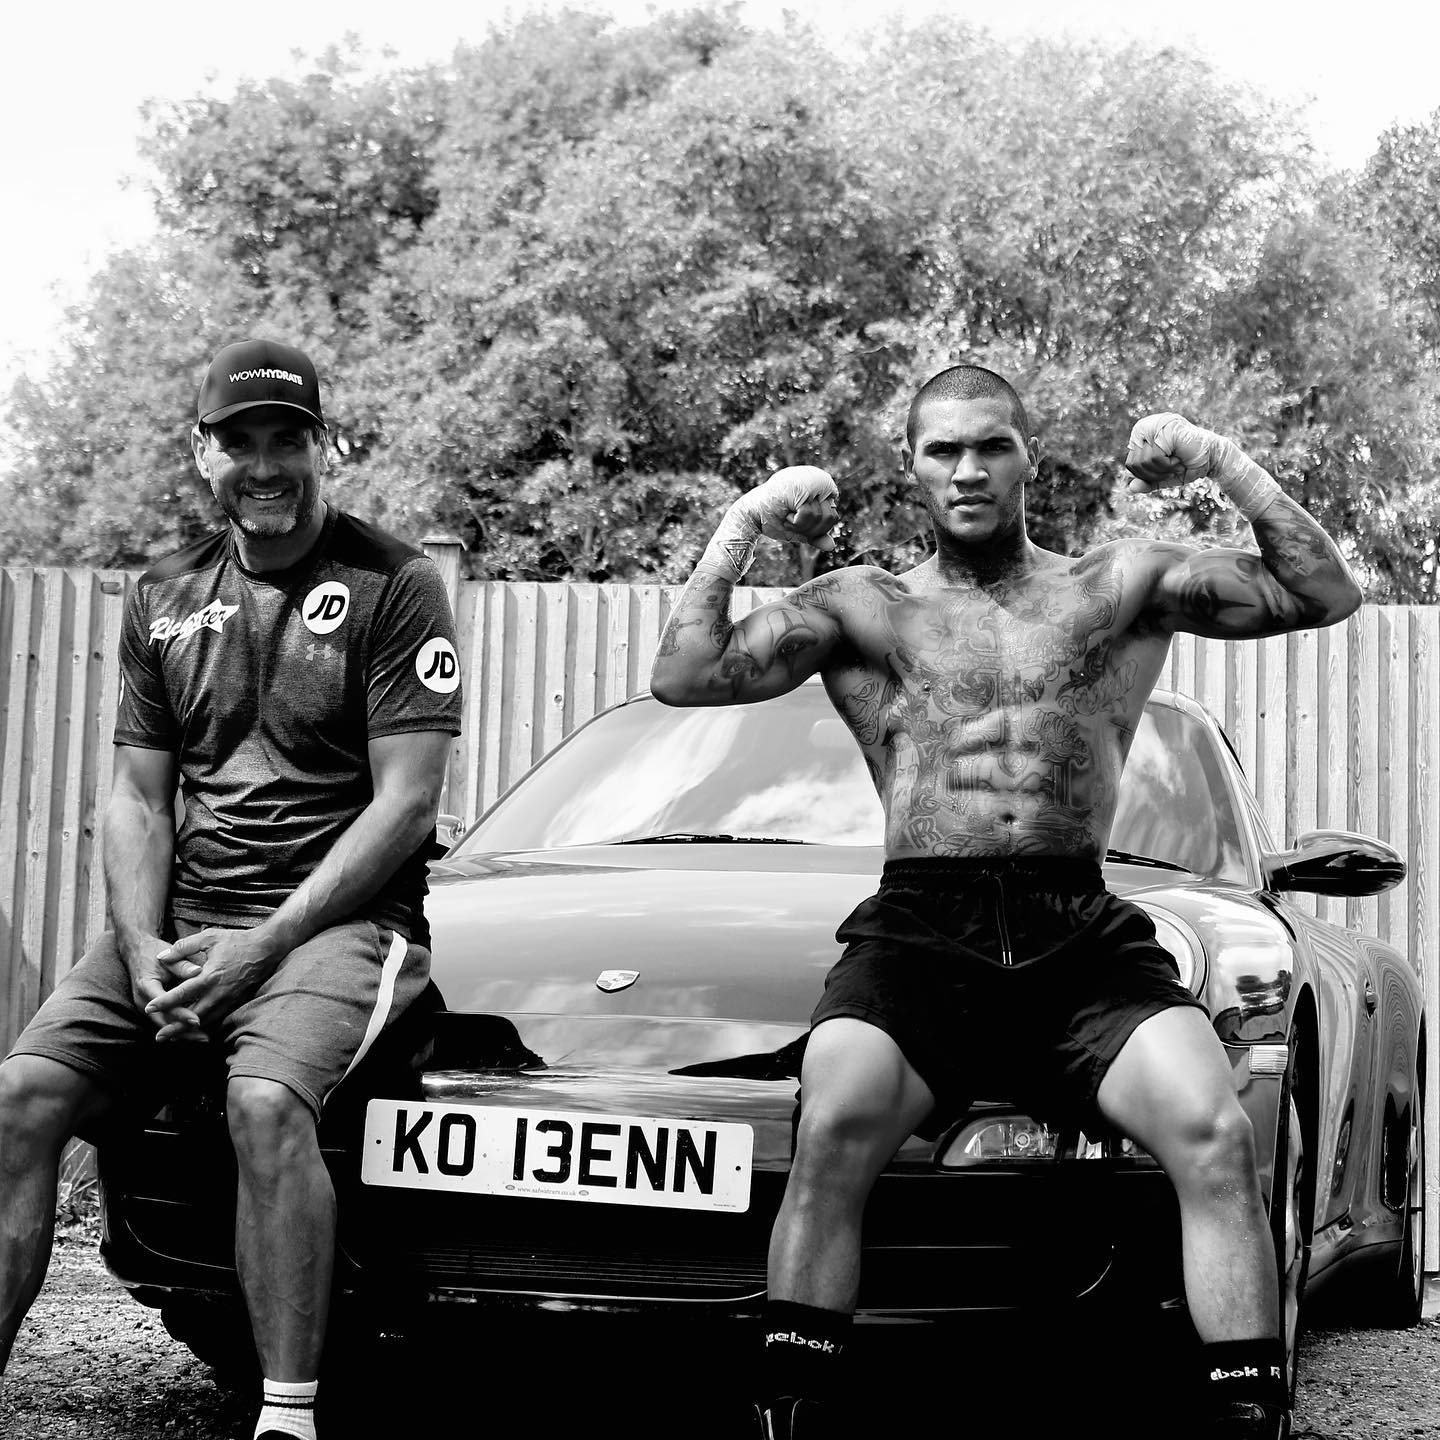 , Chris Eubank Jr and Conor Benn’s amazing car collection, including a £258,000 Rolls-Royce and £215,000 Lamborghini